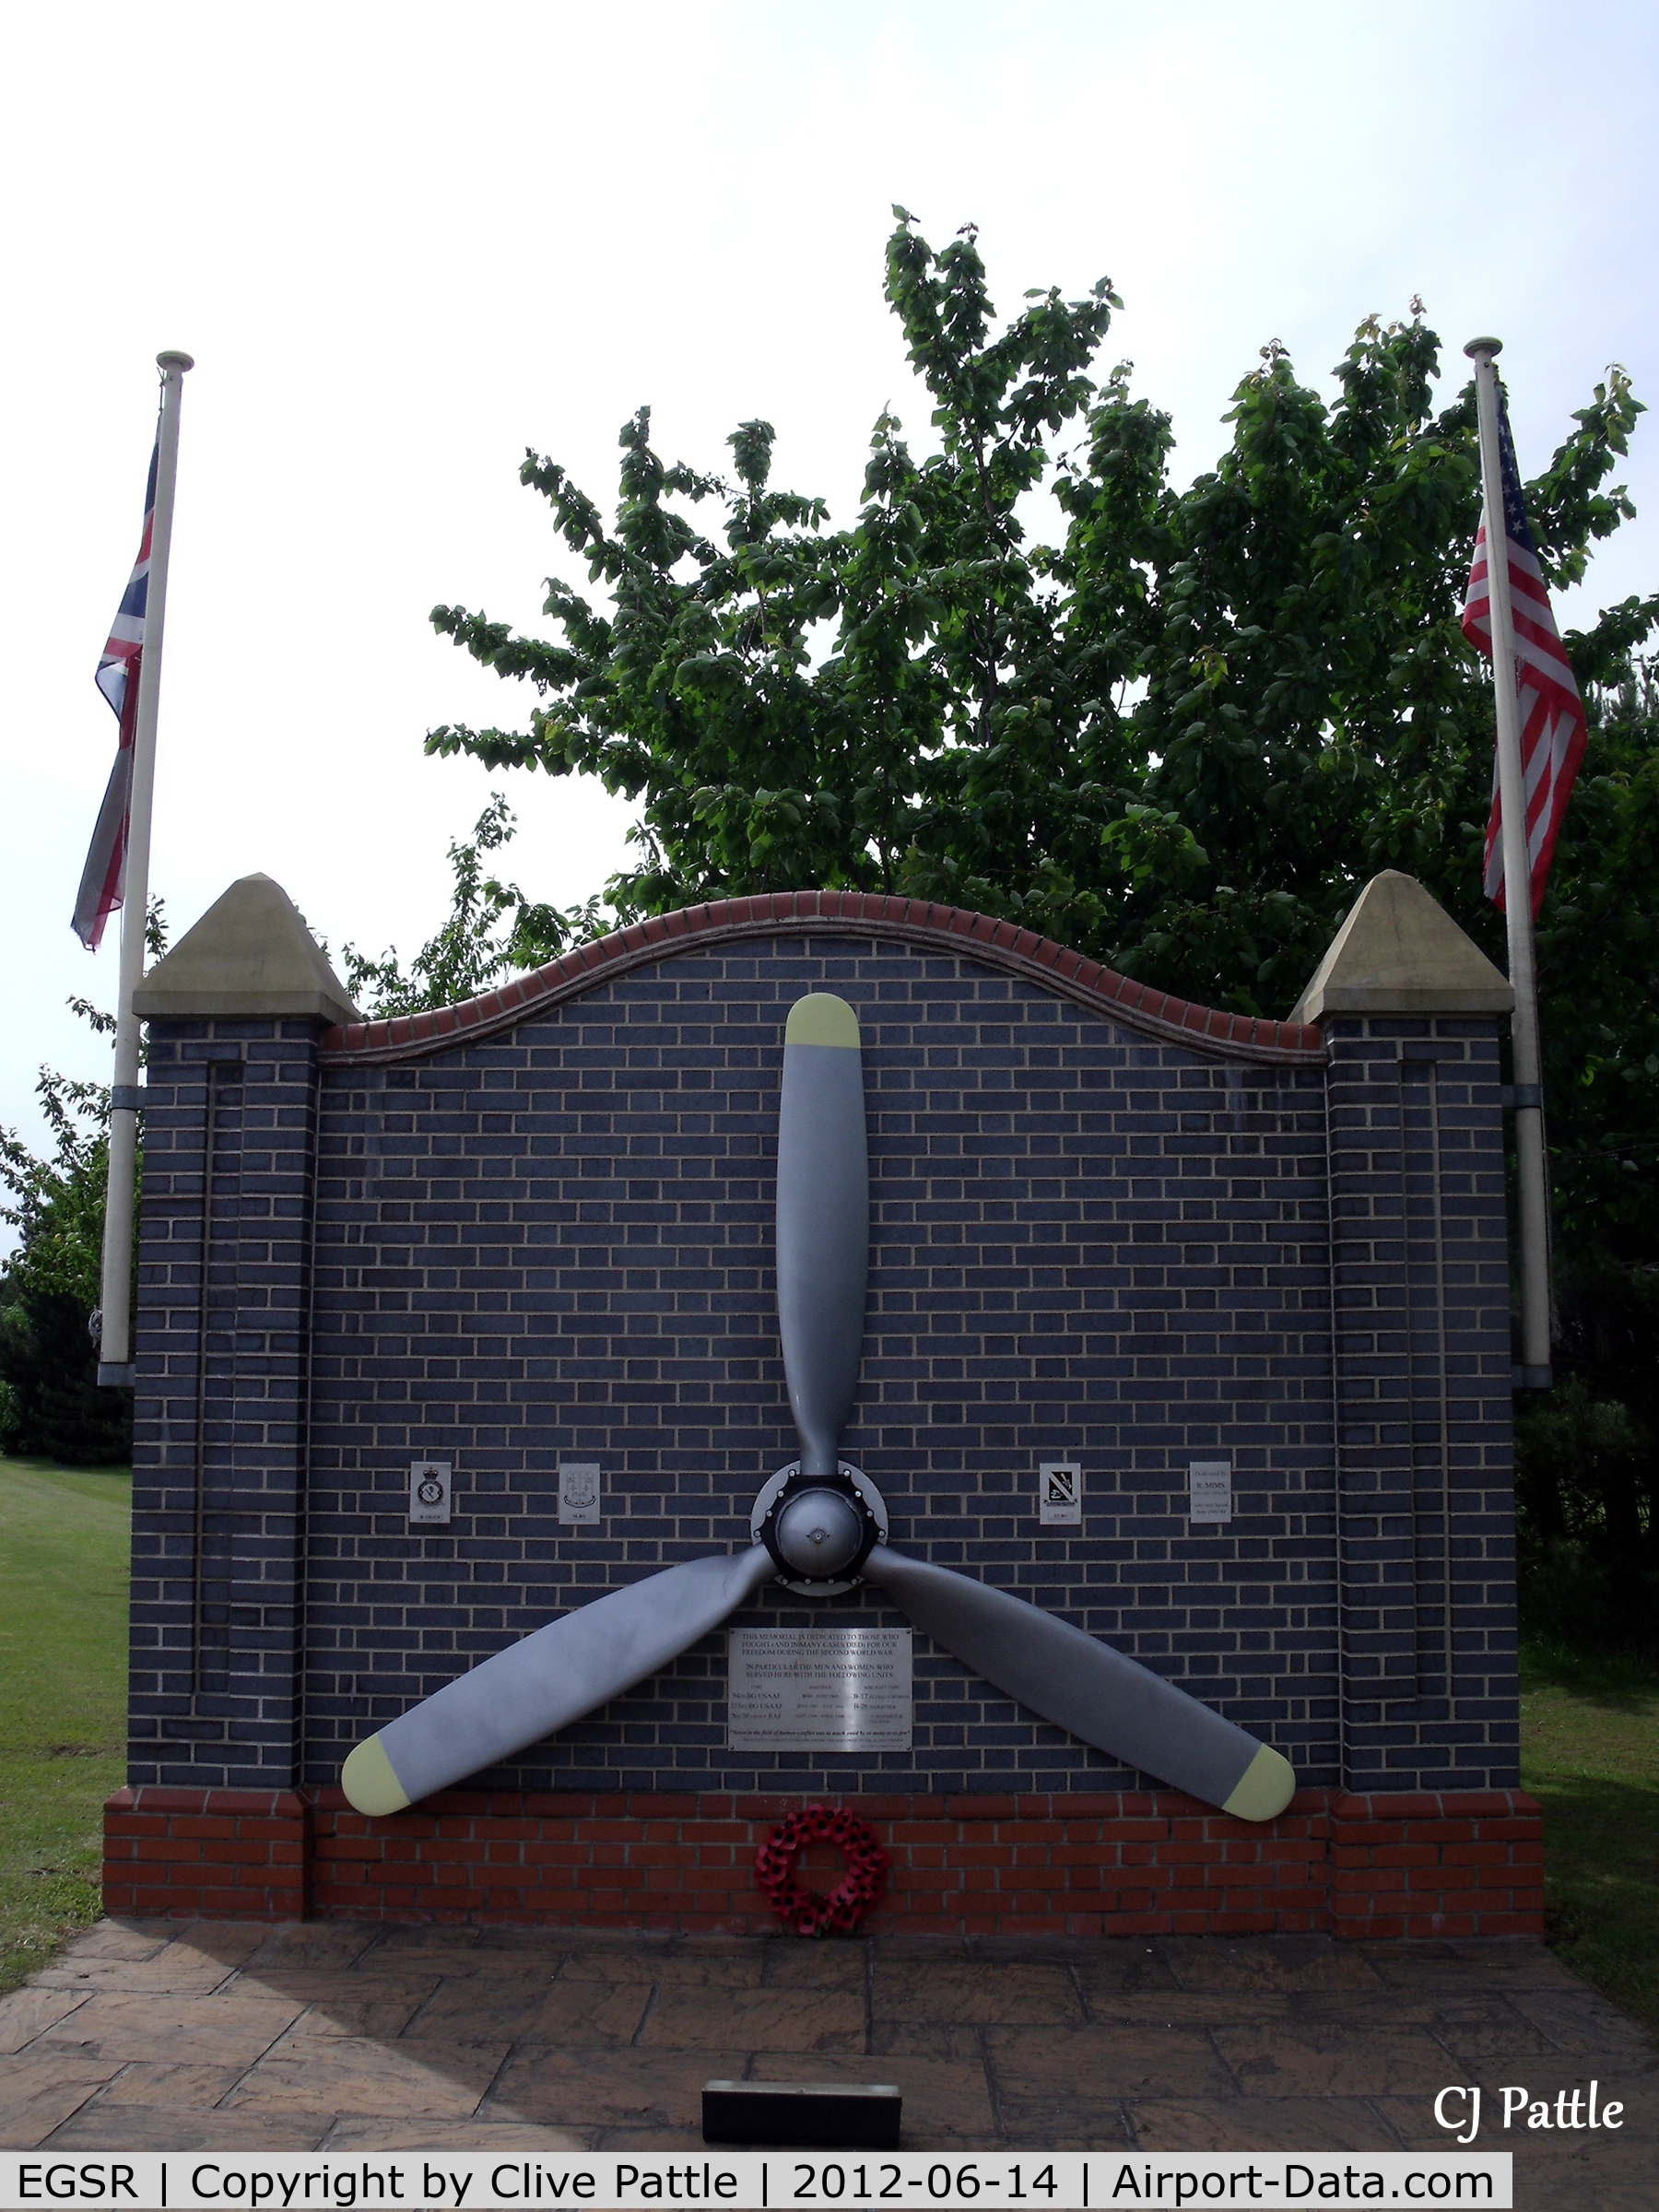 Earls Colne Airfield Airport, Halstead, England United Kingdom (EGSR) - Memorial to WWII USAF Airmen at Earl's Colne EGSR